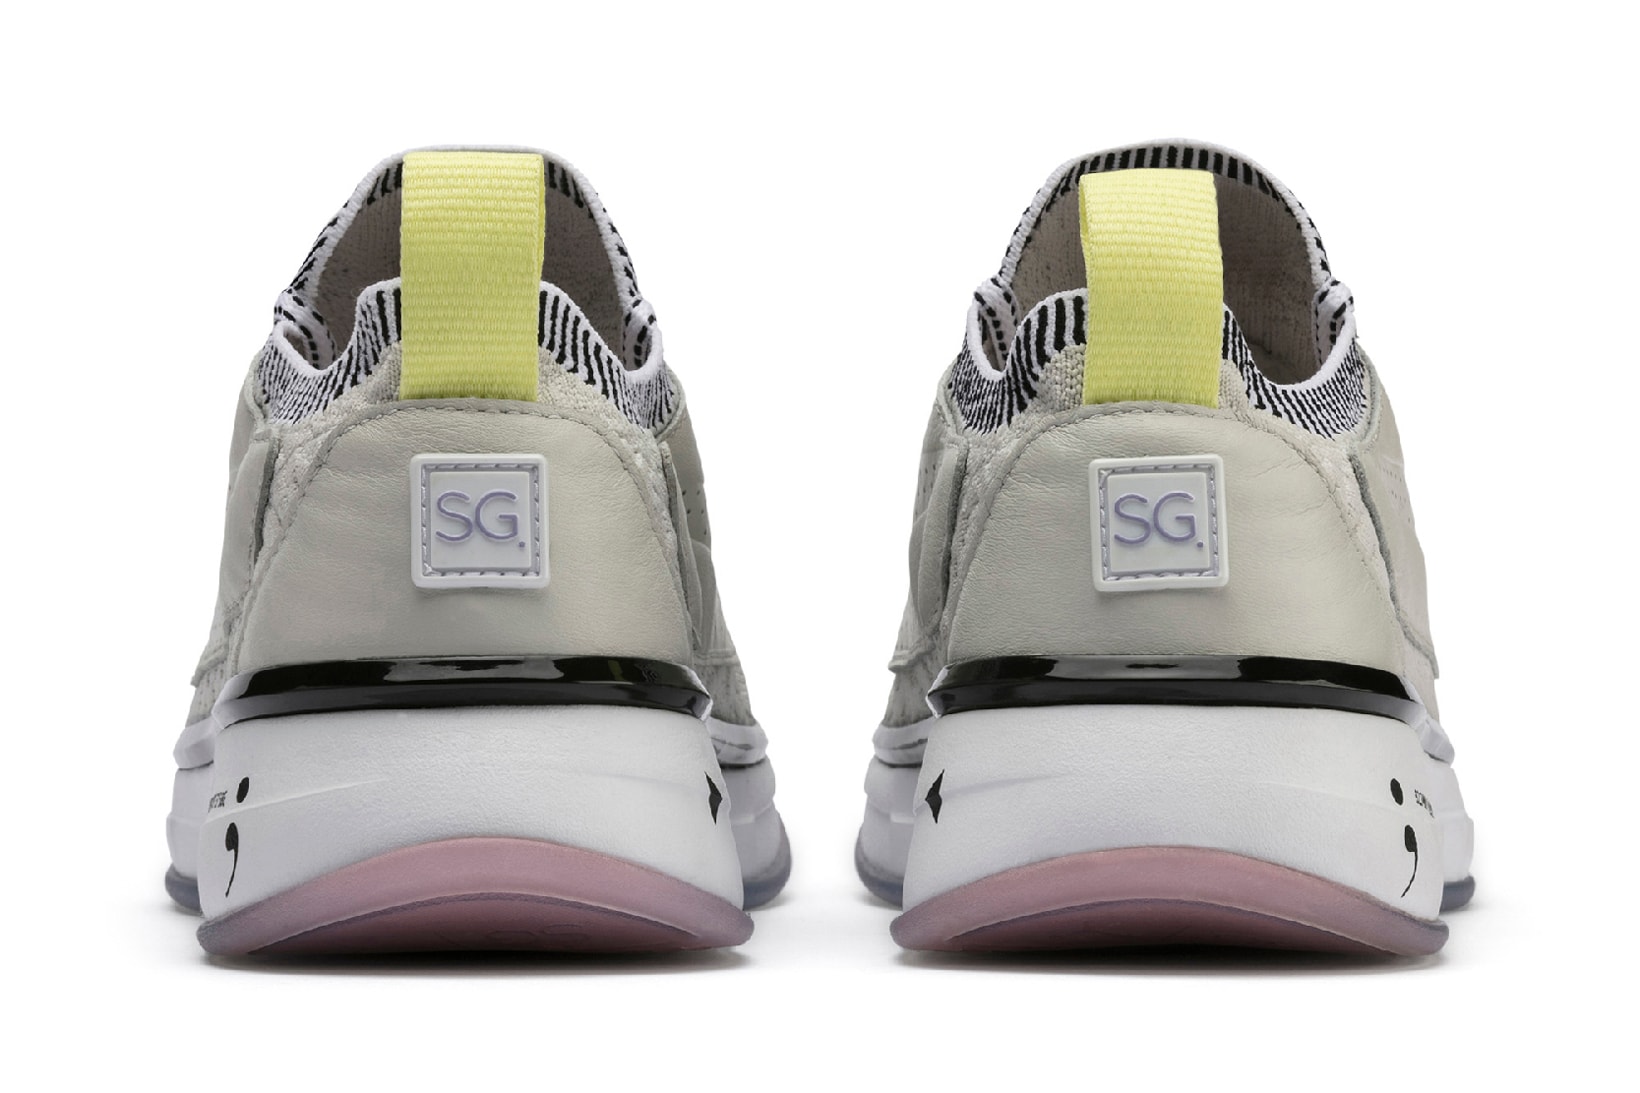 Selena Gomez x PUMA Spring Summer 2019 Collection SG Runner Strength Training Shoes Glacier Grey White